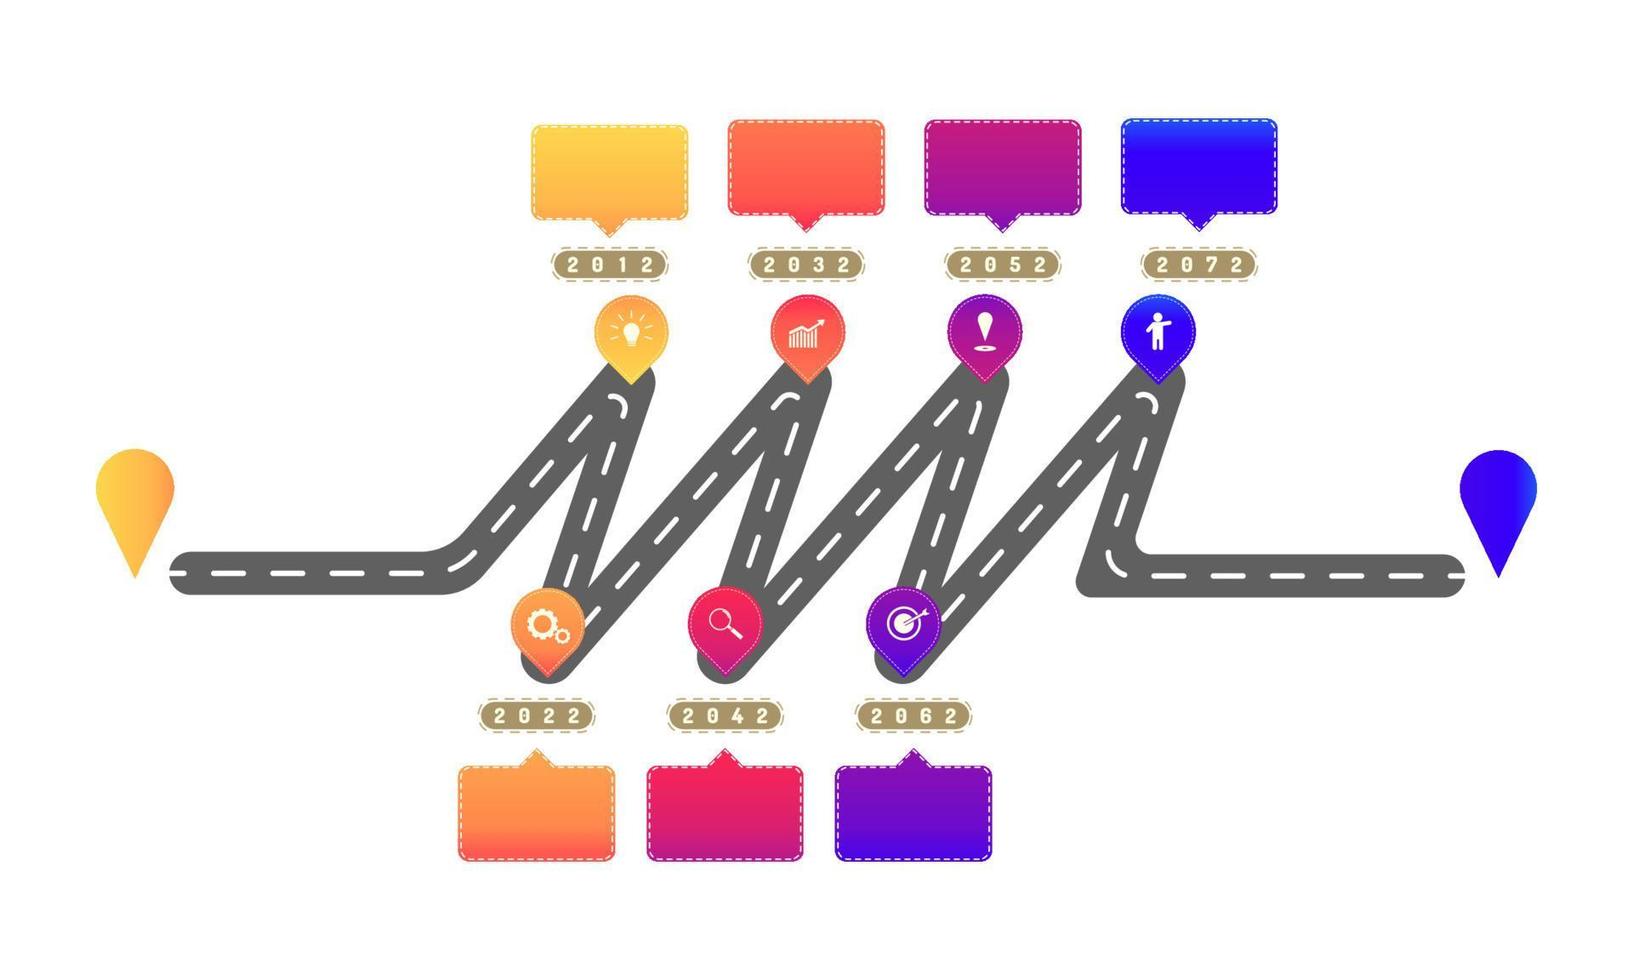 zig zag highway roadmap timeline elements with markpoint graph think search gear target icons. vector illustration eps10